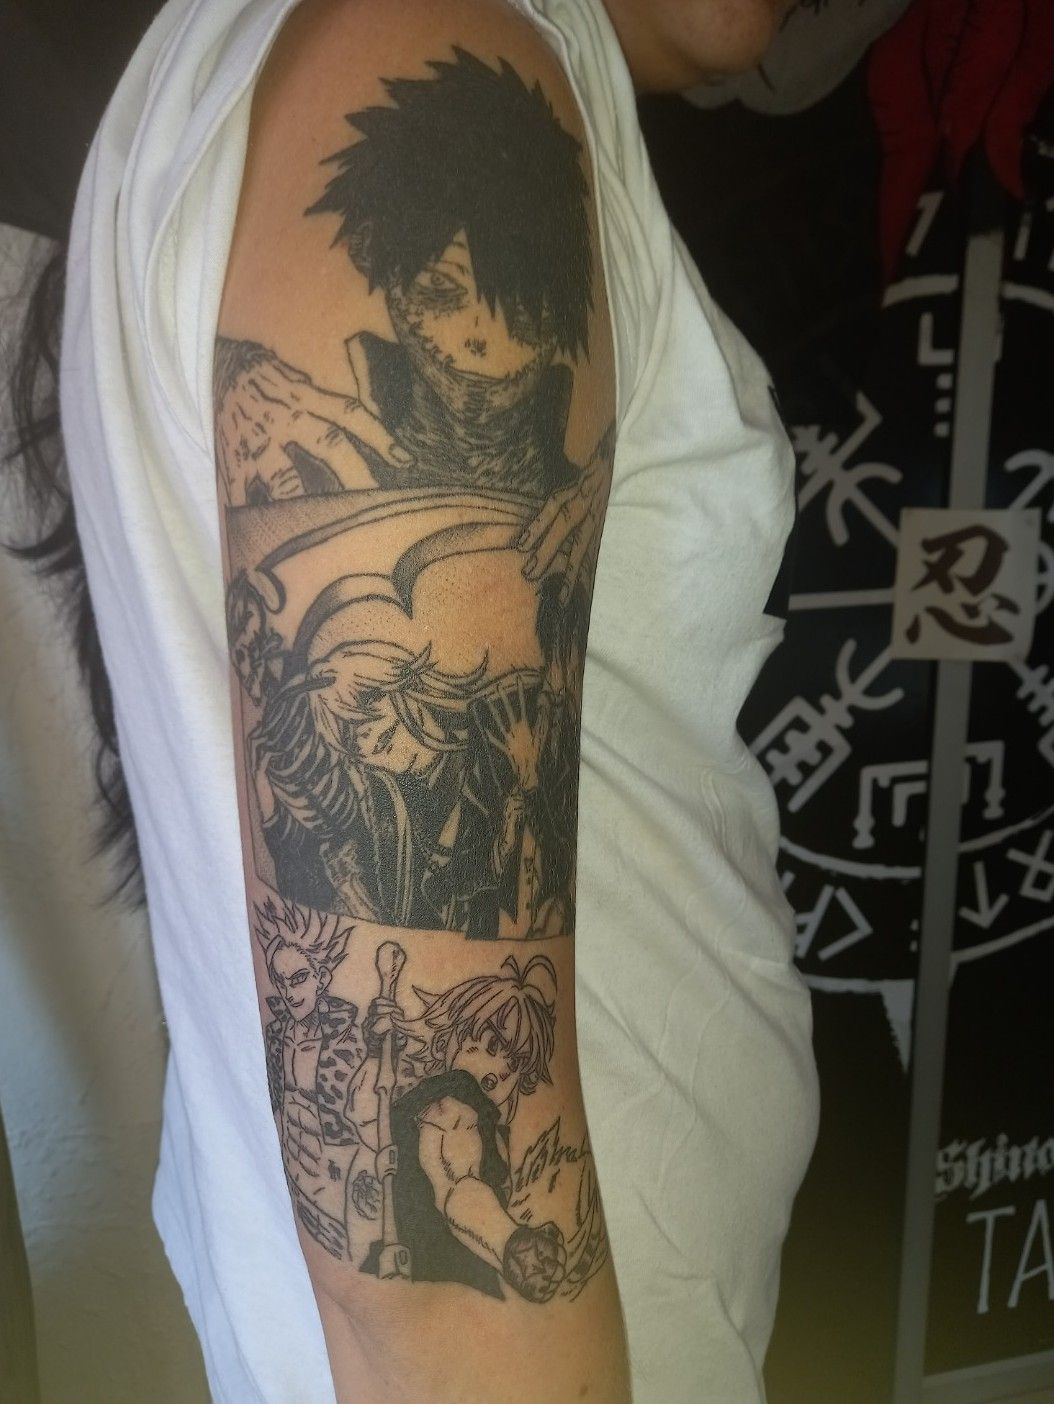 1st half of anime Sleeve done by Sneak from 1up ink tattoo studio Dallas,  TX : r/tattoos